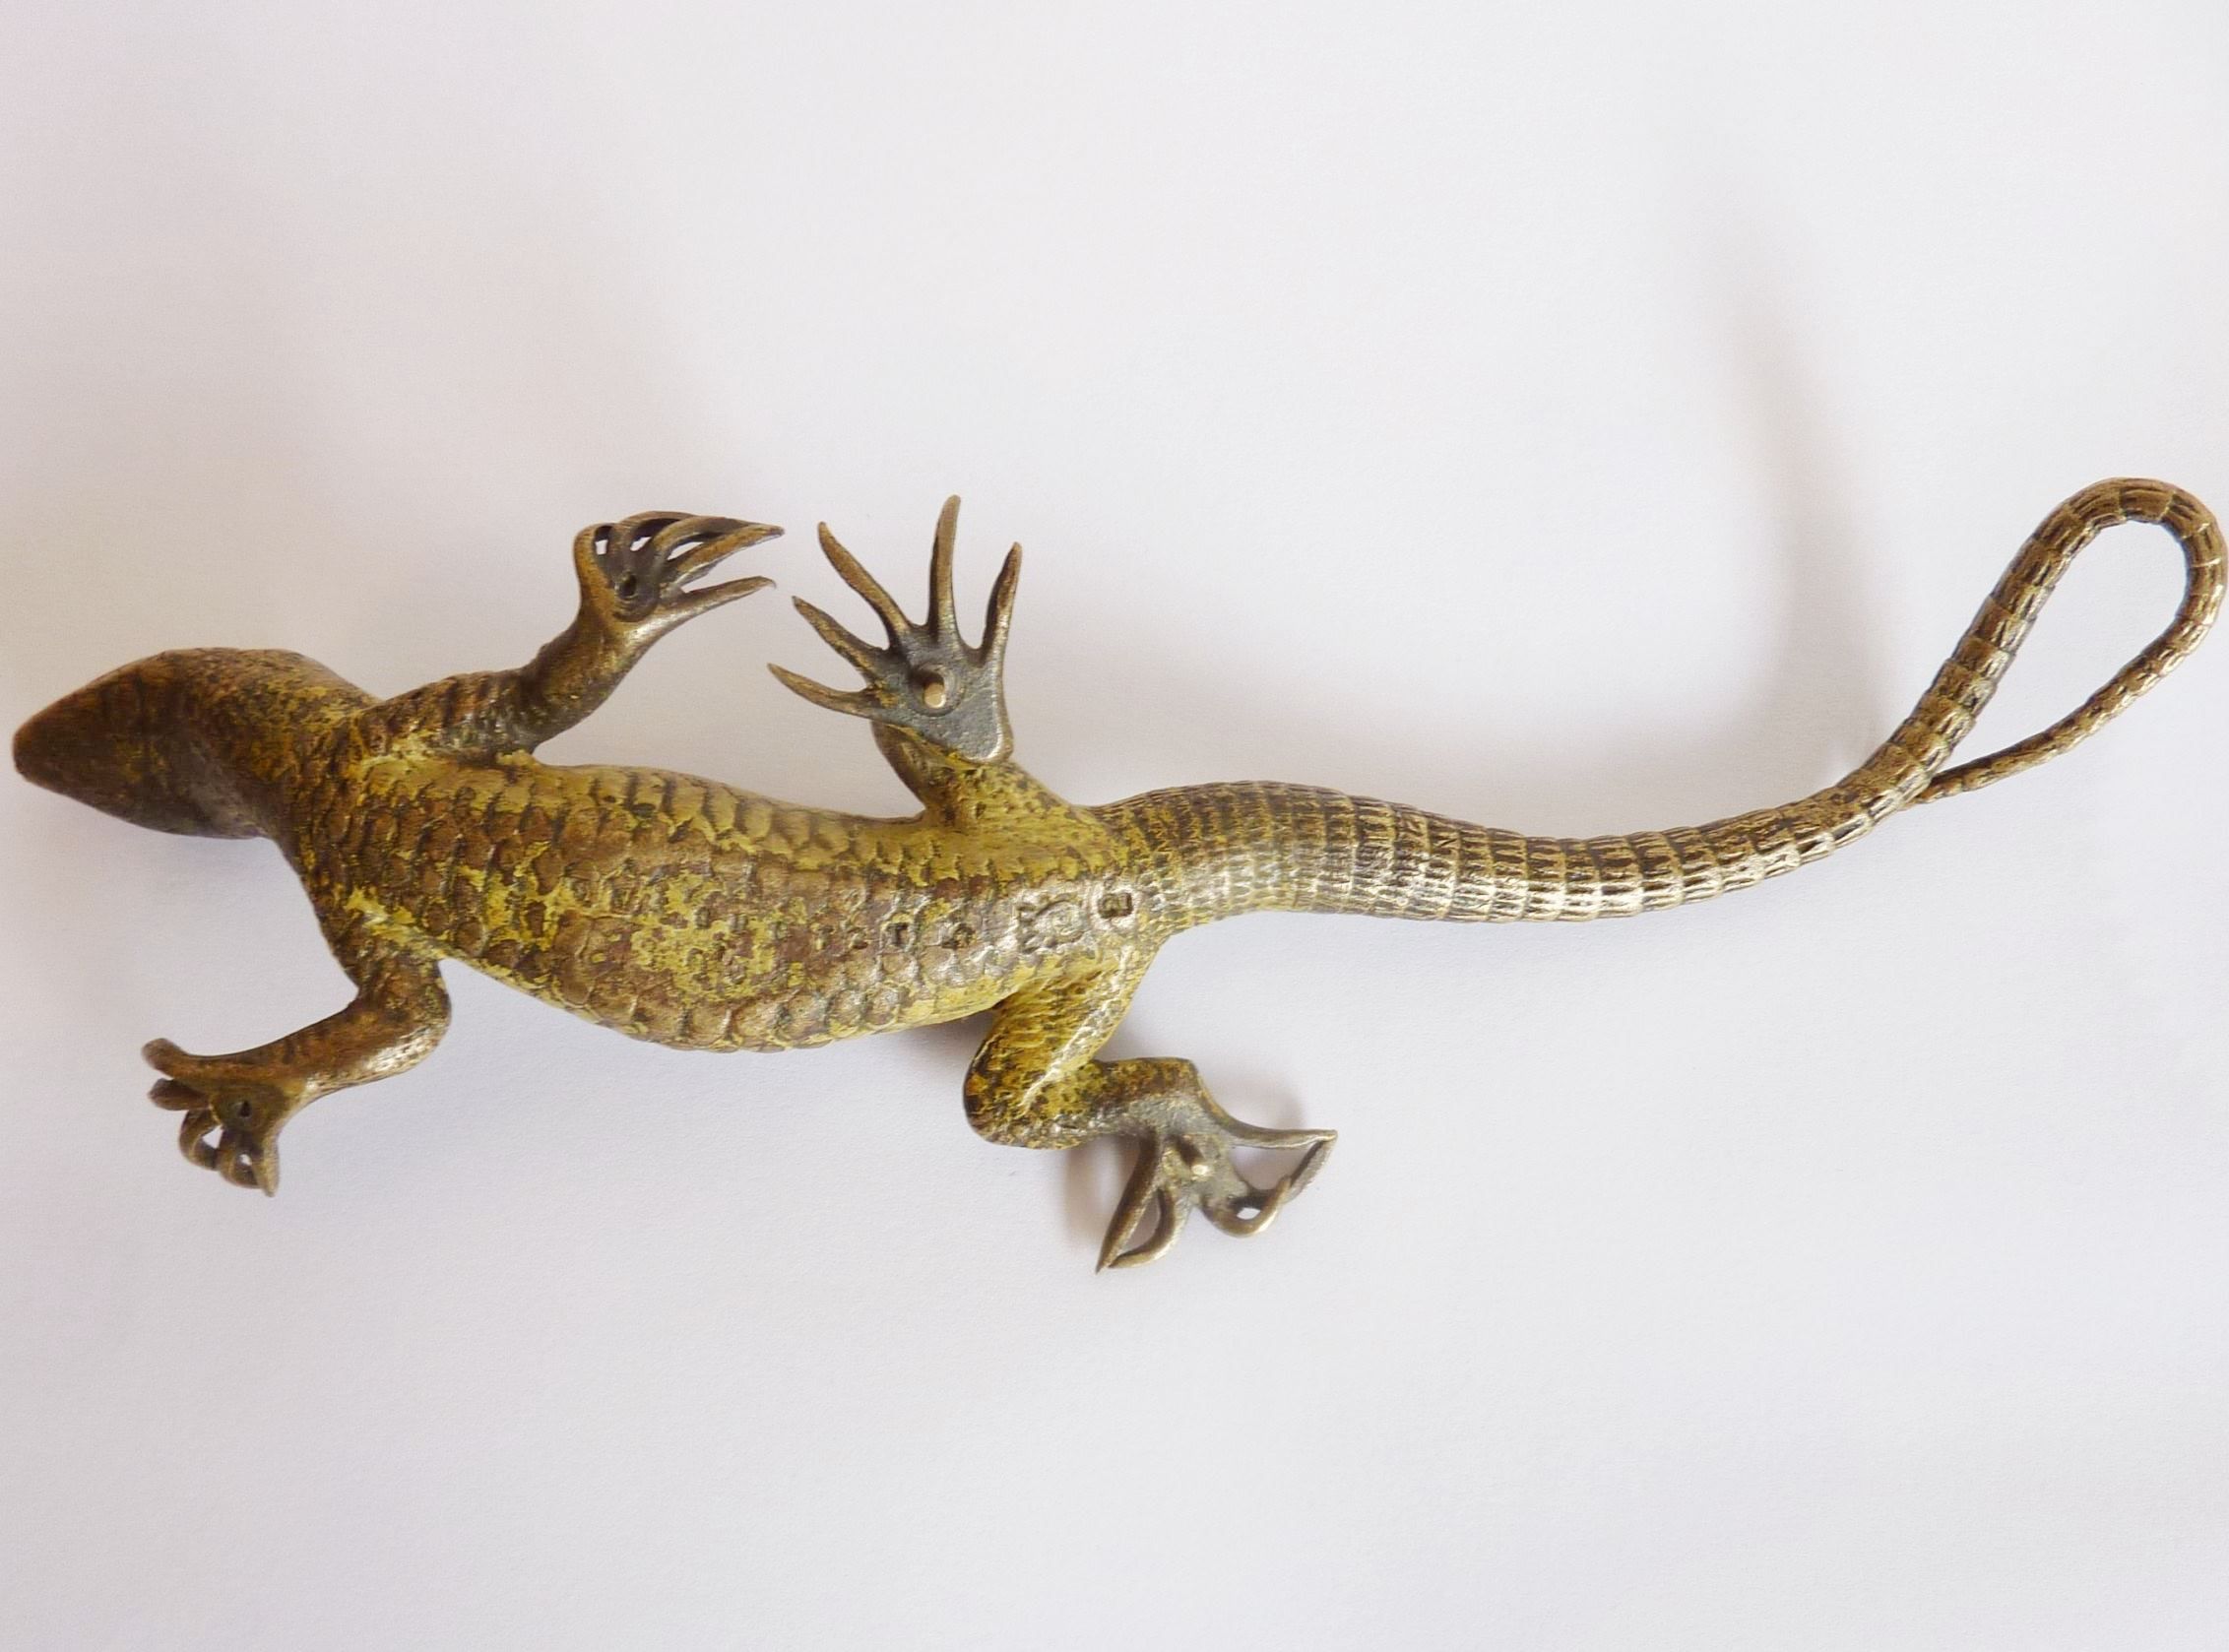 An early 20th century cold-painted bronze model of a lizard with yellow scaly skin; - Image 5 of 5